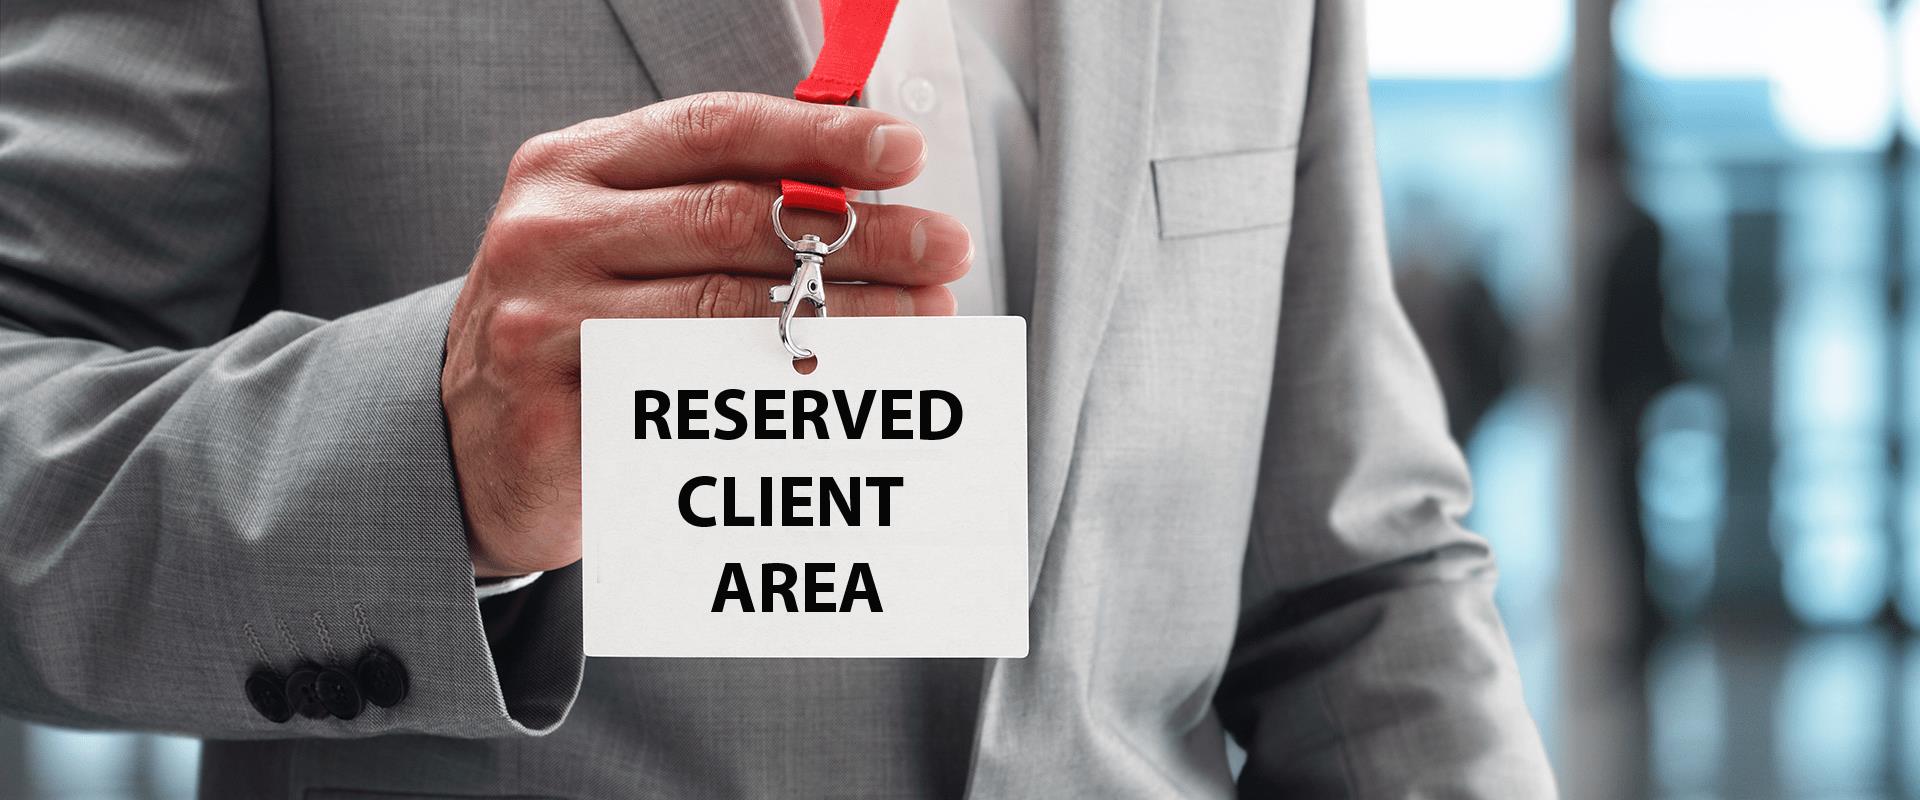 clients_reserved_area